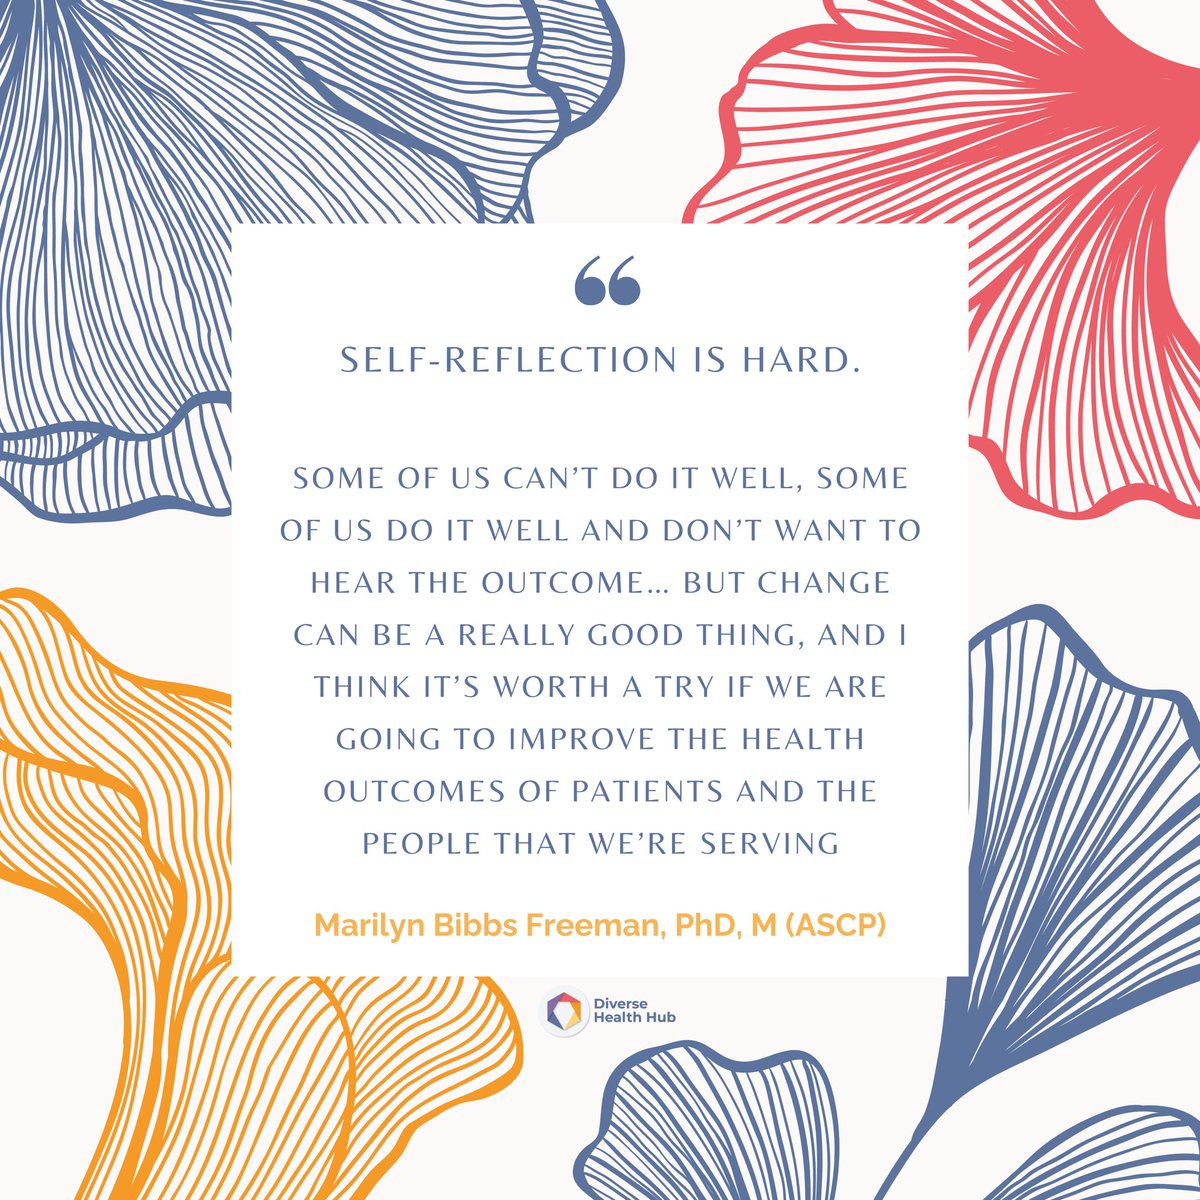 #SelfReflection is essential for personal growth and positive change. Dr. Marilyn Freeman’s @DGSvirginia ideas on this topic are inspiring and have the potential to transform healthcare. Let's work towards improving #healthoutcomes for ourselves and those around us. #healthequity